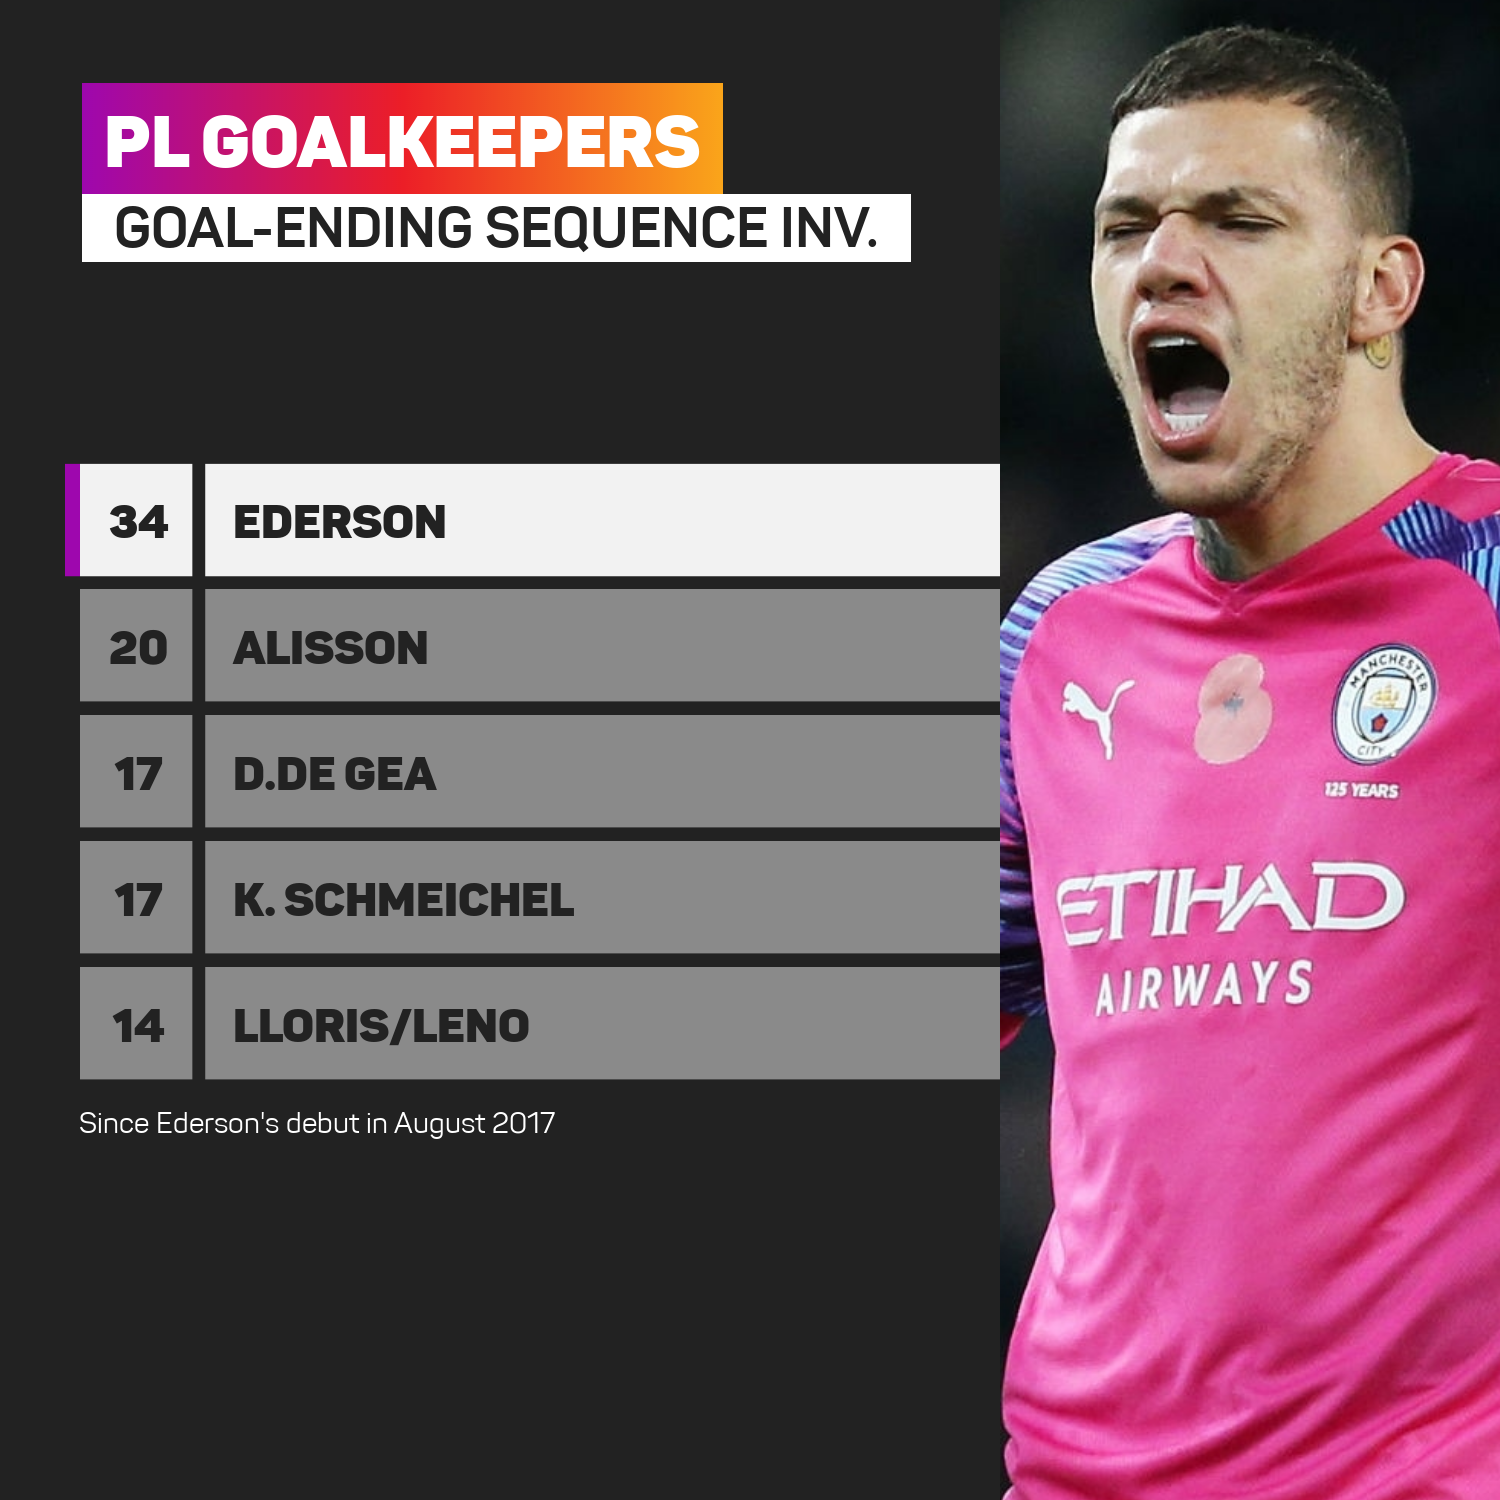 Ederson is top for goal-ending sequence involvements